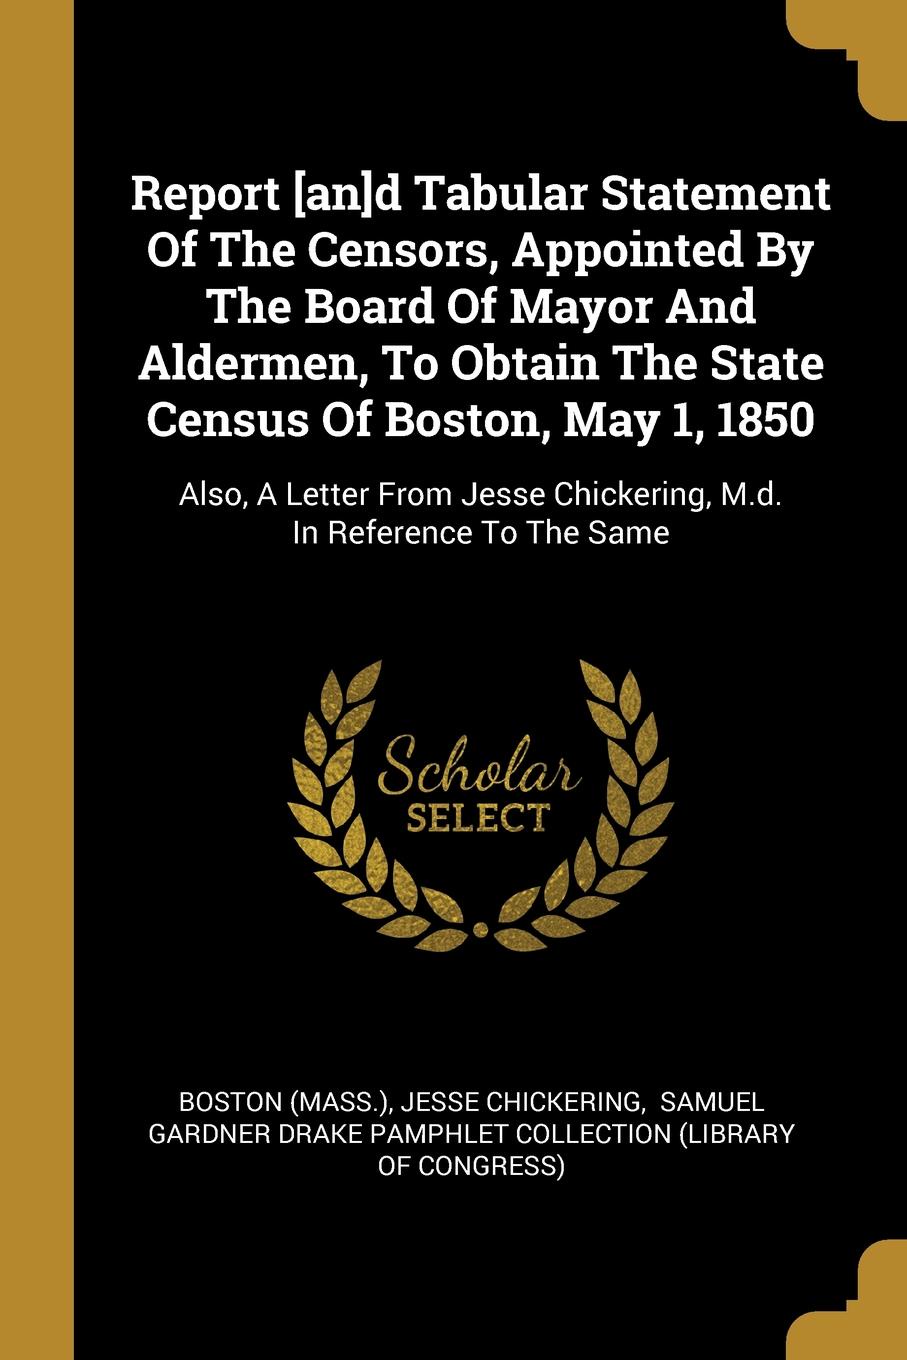 Report .an.d Tabular Statement Of The Censors, Appointed By The Board Of Mayor And Aldermen, To Obtain The State Census Of Boston, May 1, 1850. Also, A Letter From Jesse Chickering, M.d. In Reference To The Same